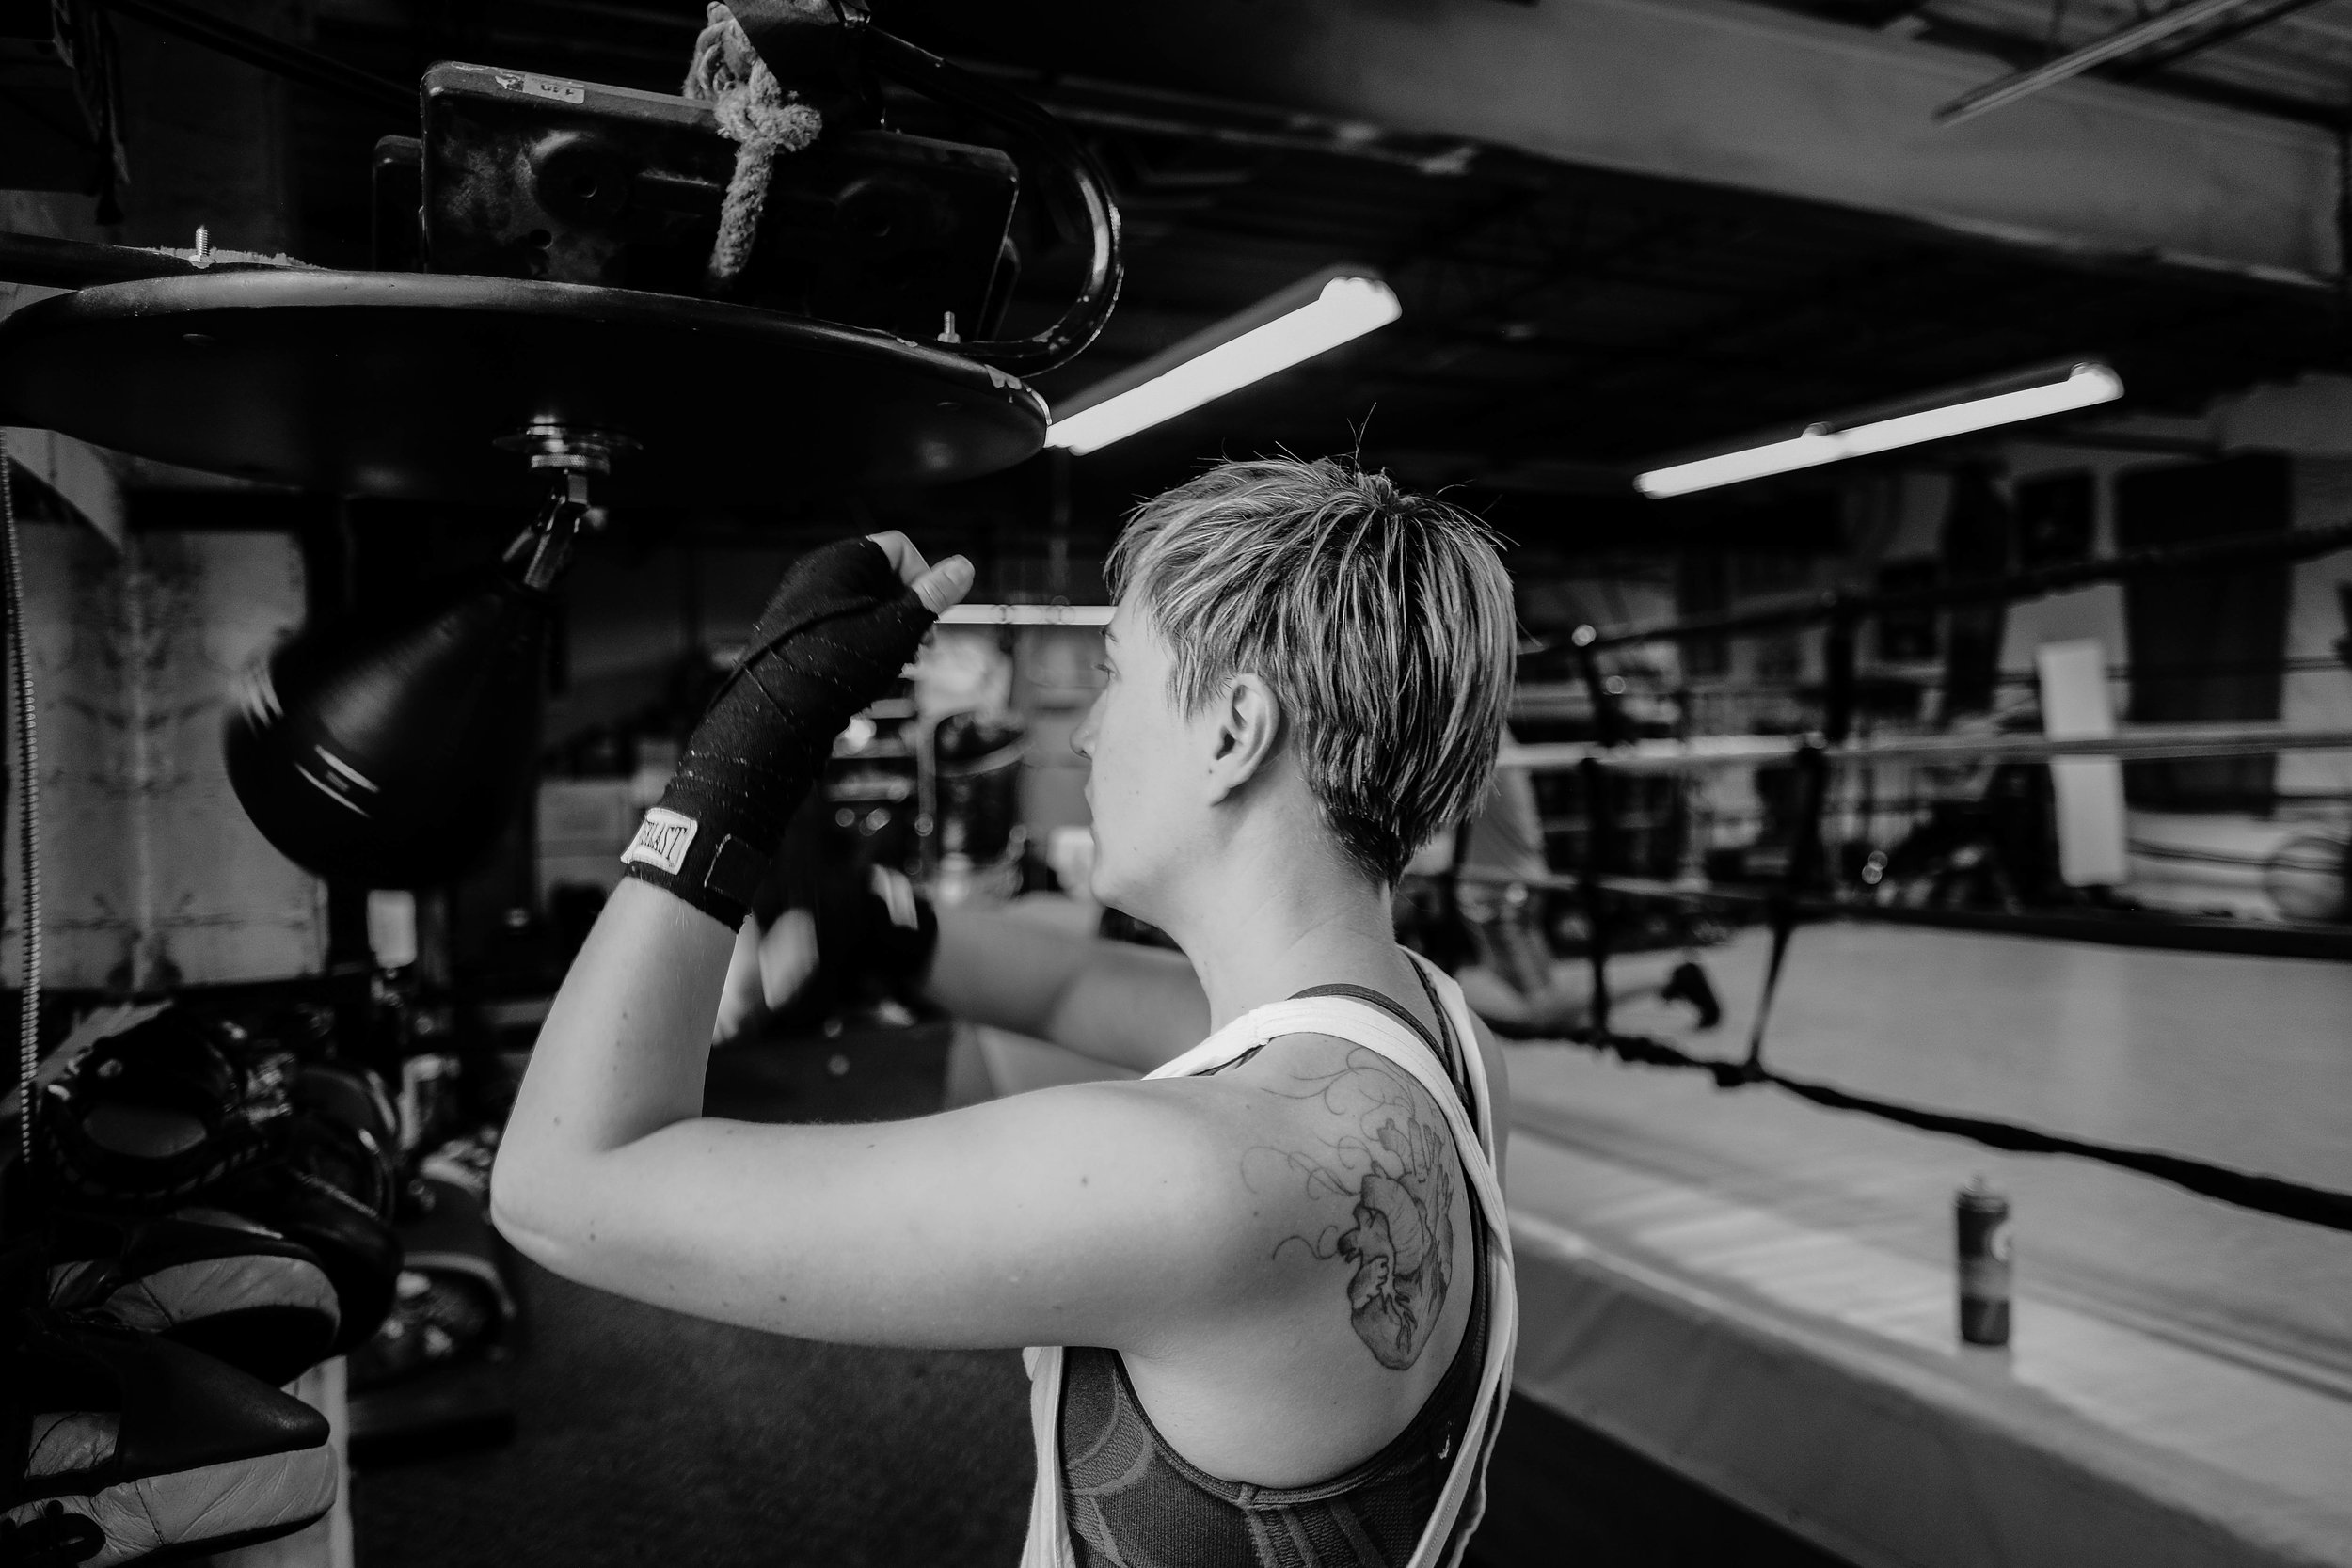 10 Things I Learned About Myself by Going to the Gym